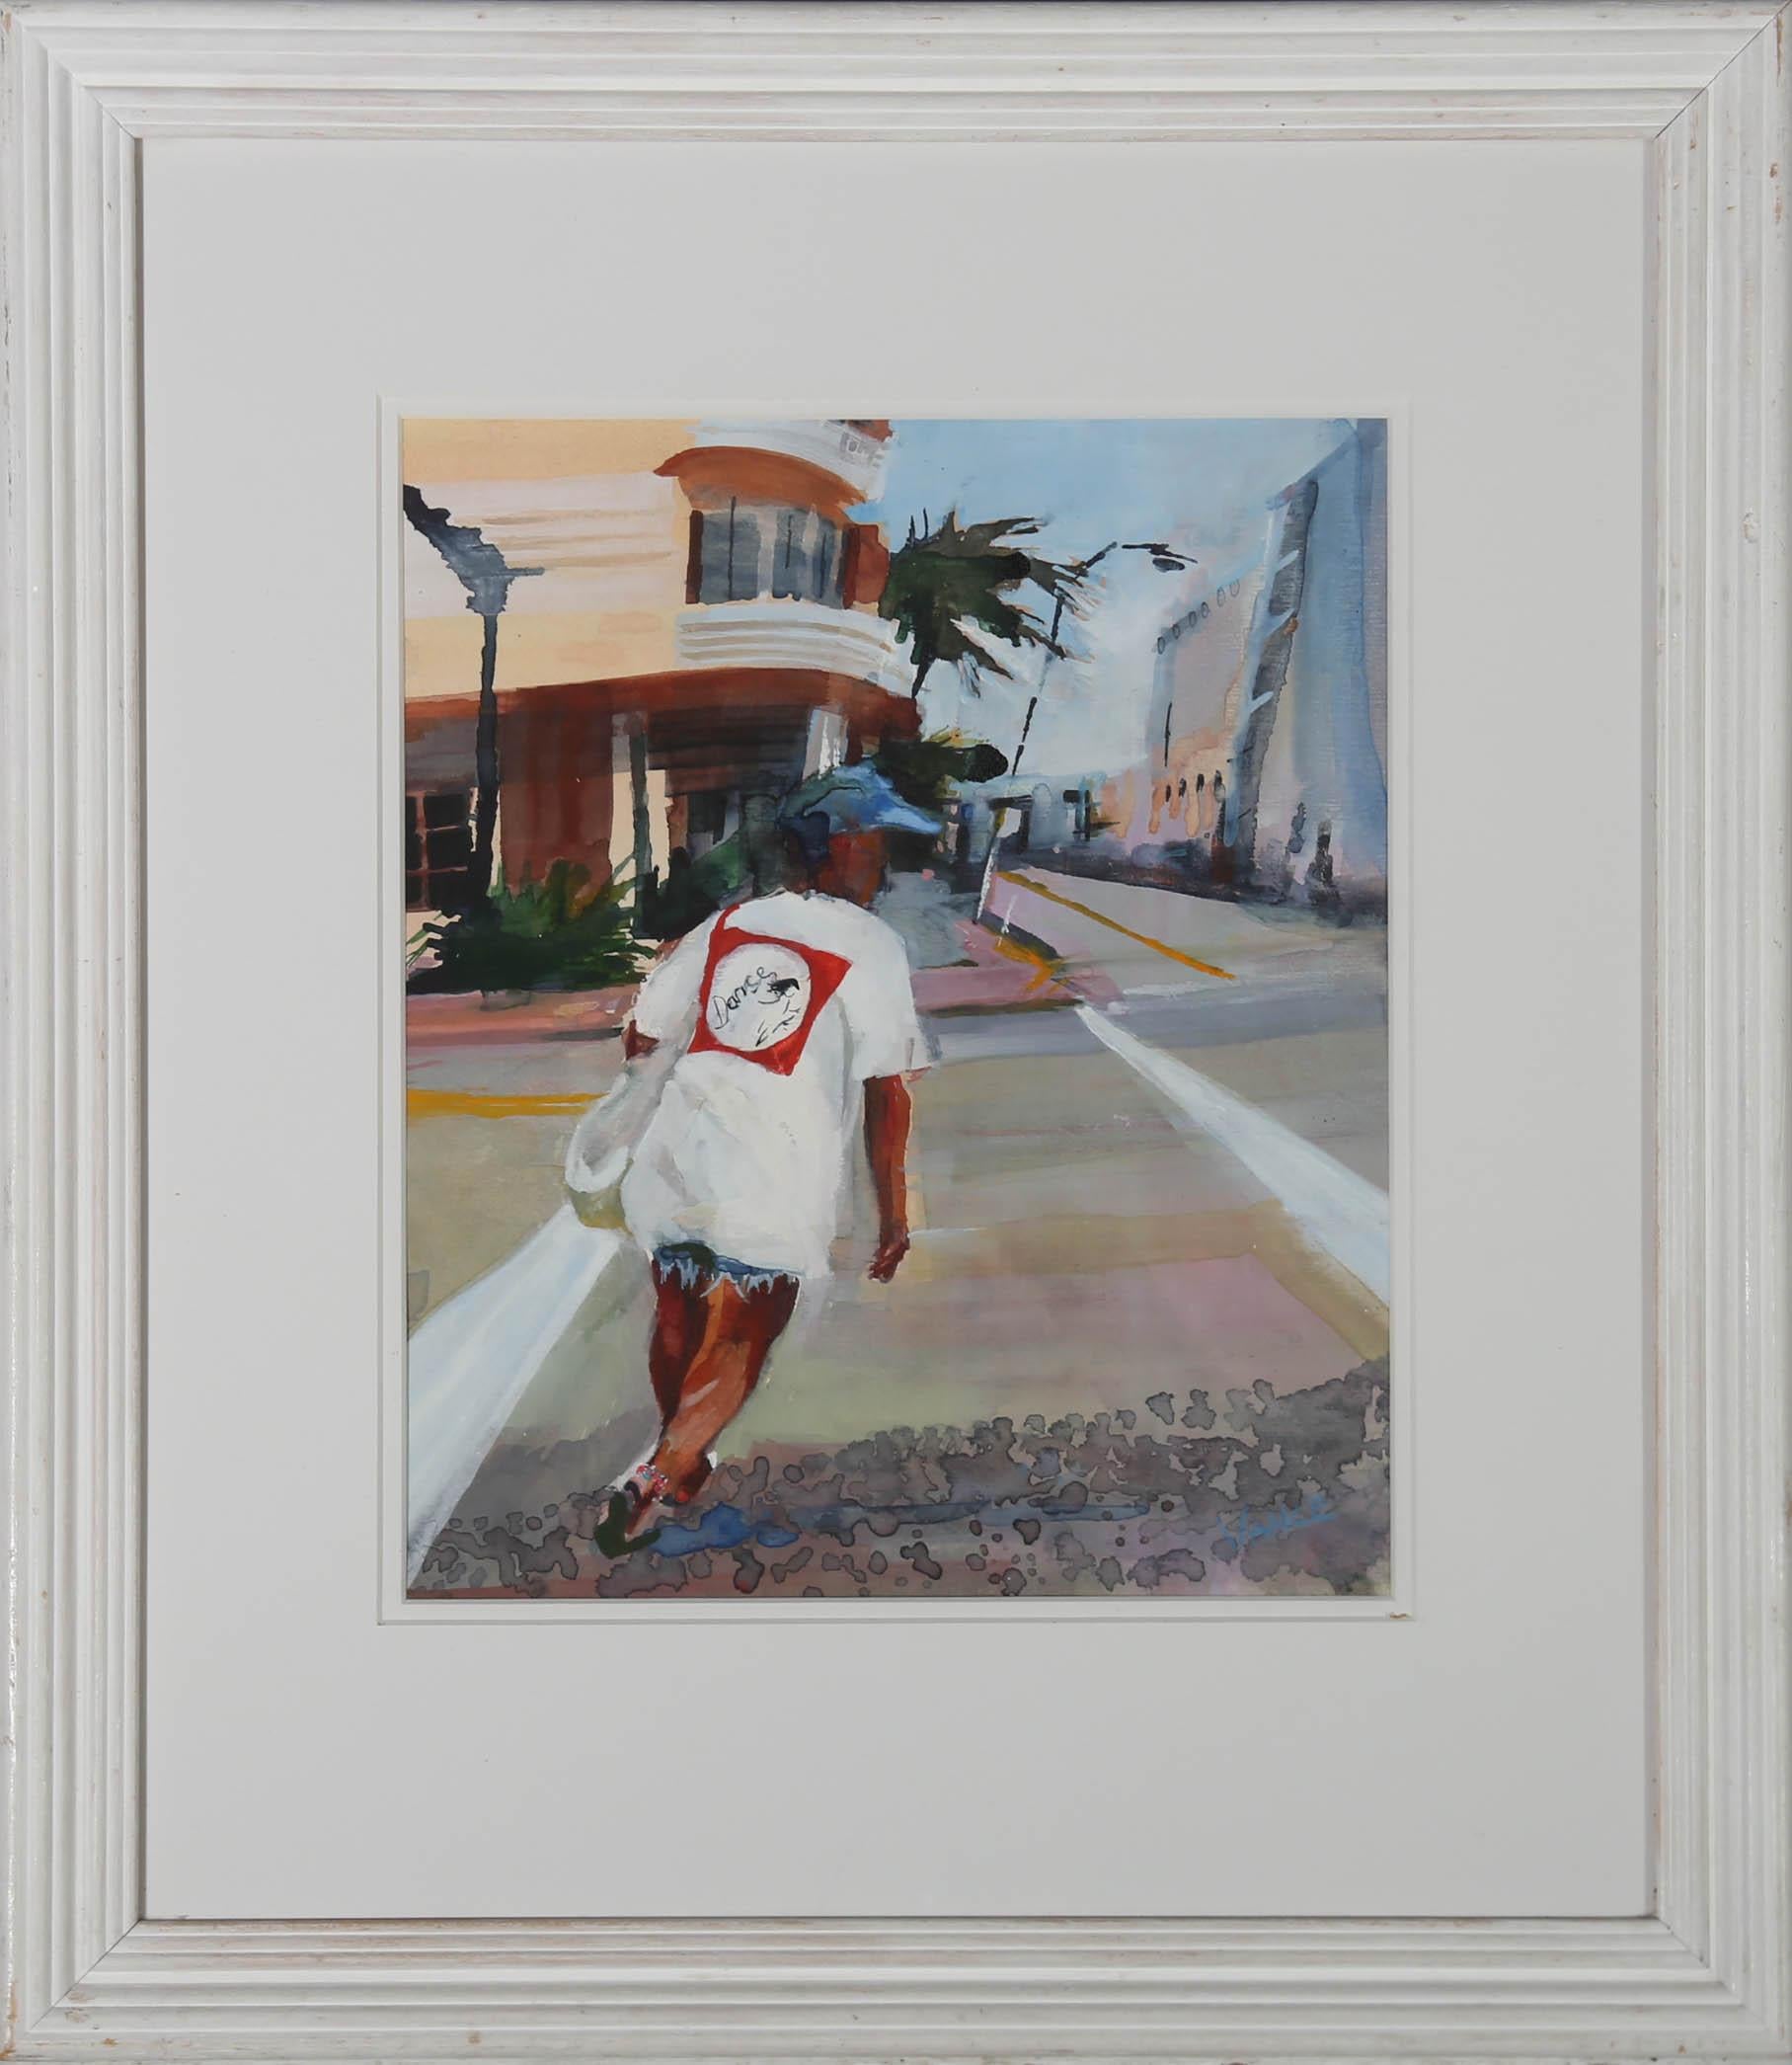 A fun, vibrant watercolour study depicting a senior citizen dressed in an oversized T-shirt, cropped shorts and ankle bracelets strolling the sidewalk of Miami. Exhibition to the reverse with artist name and title. Presented in a white painted